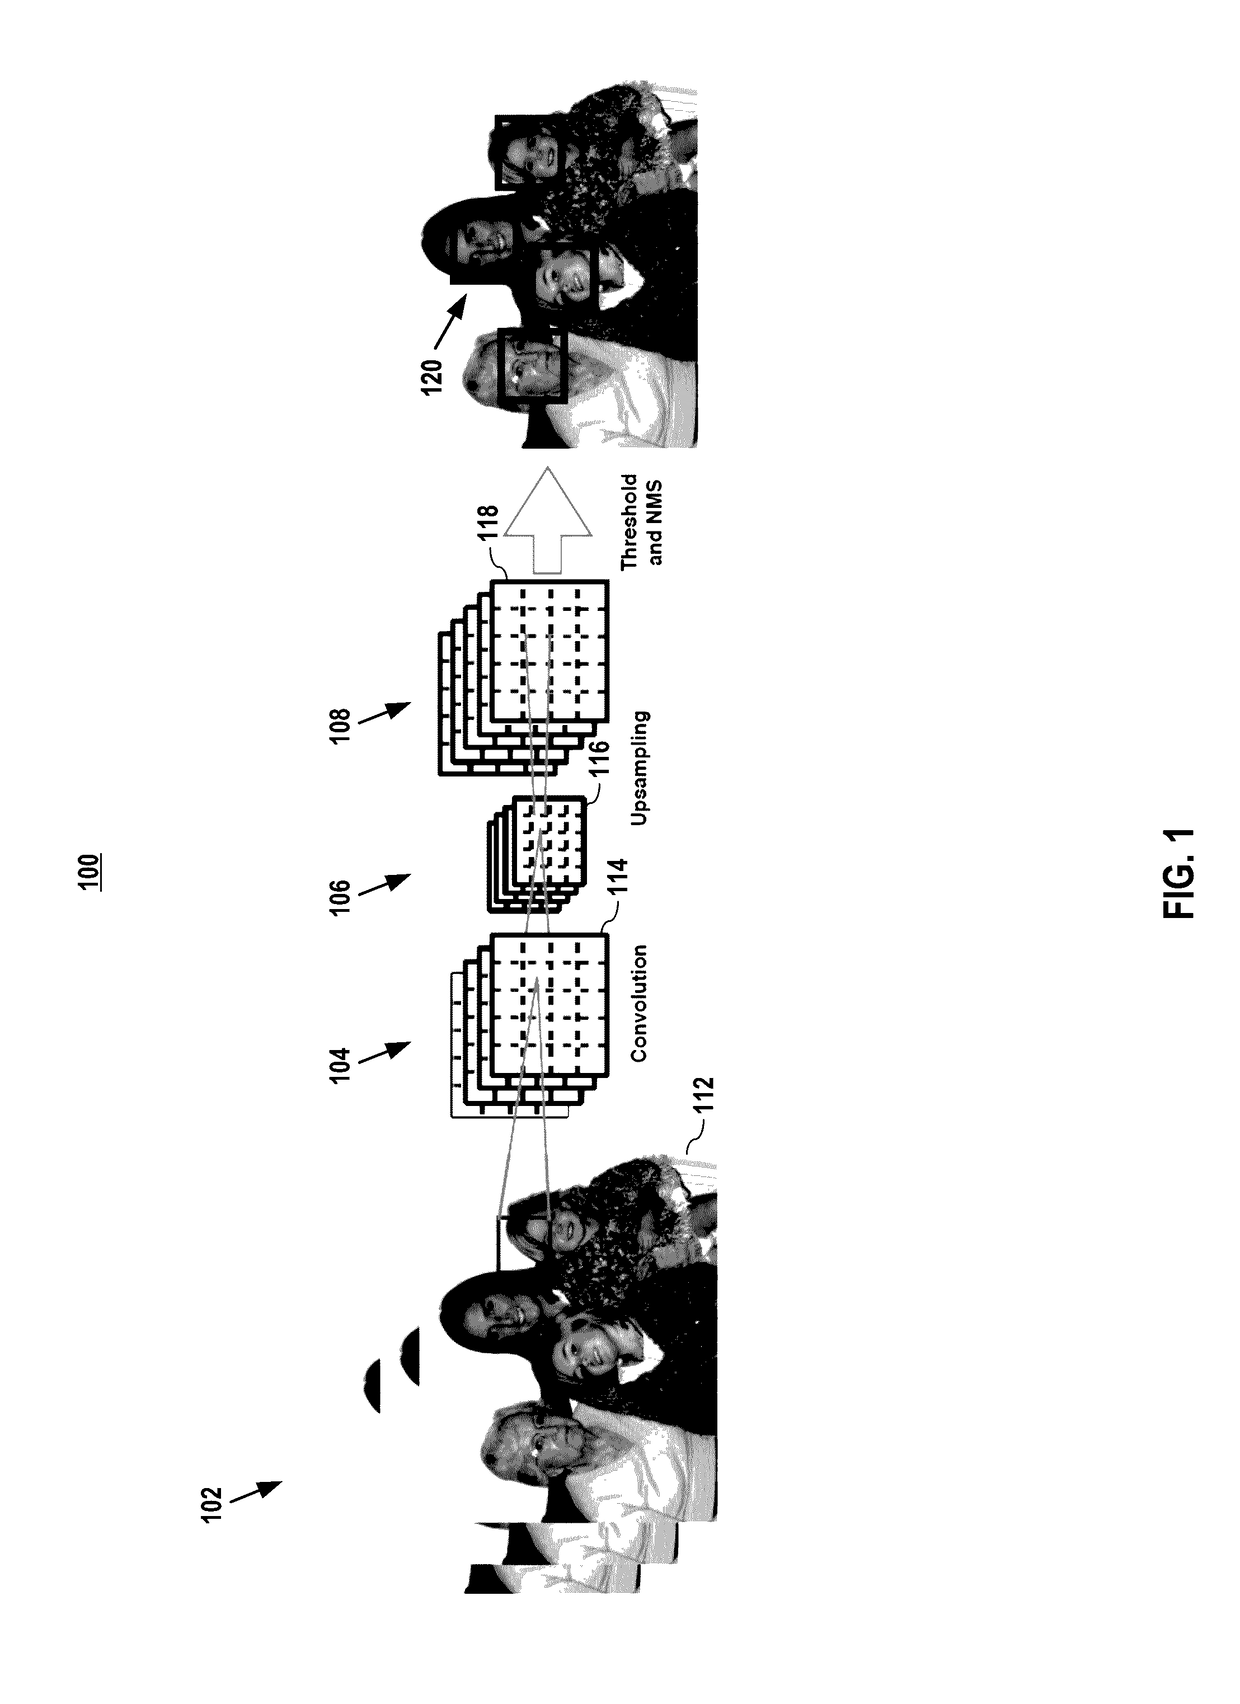 Systems and methods for end-to-end object detection